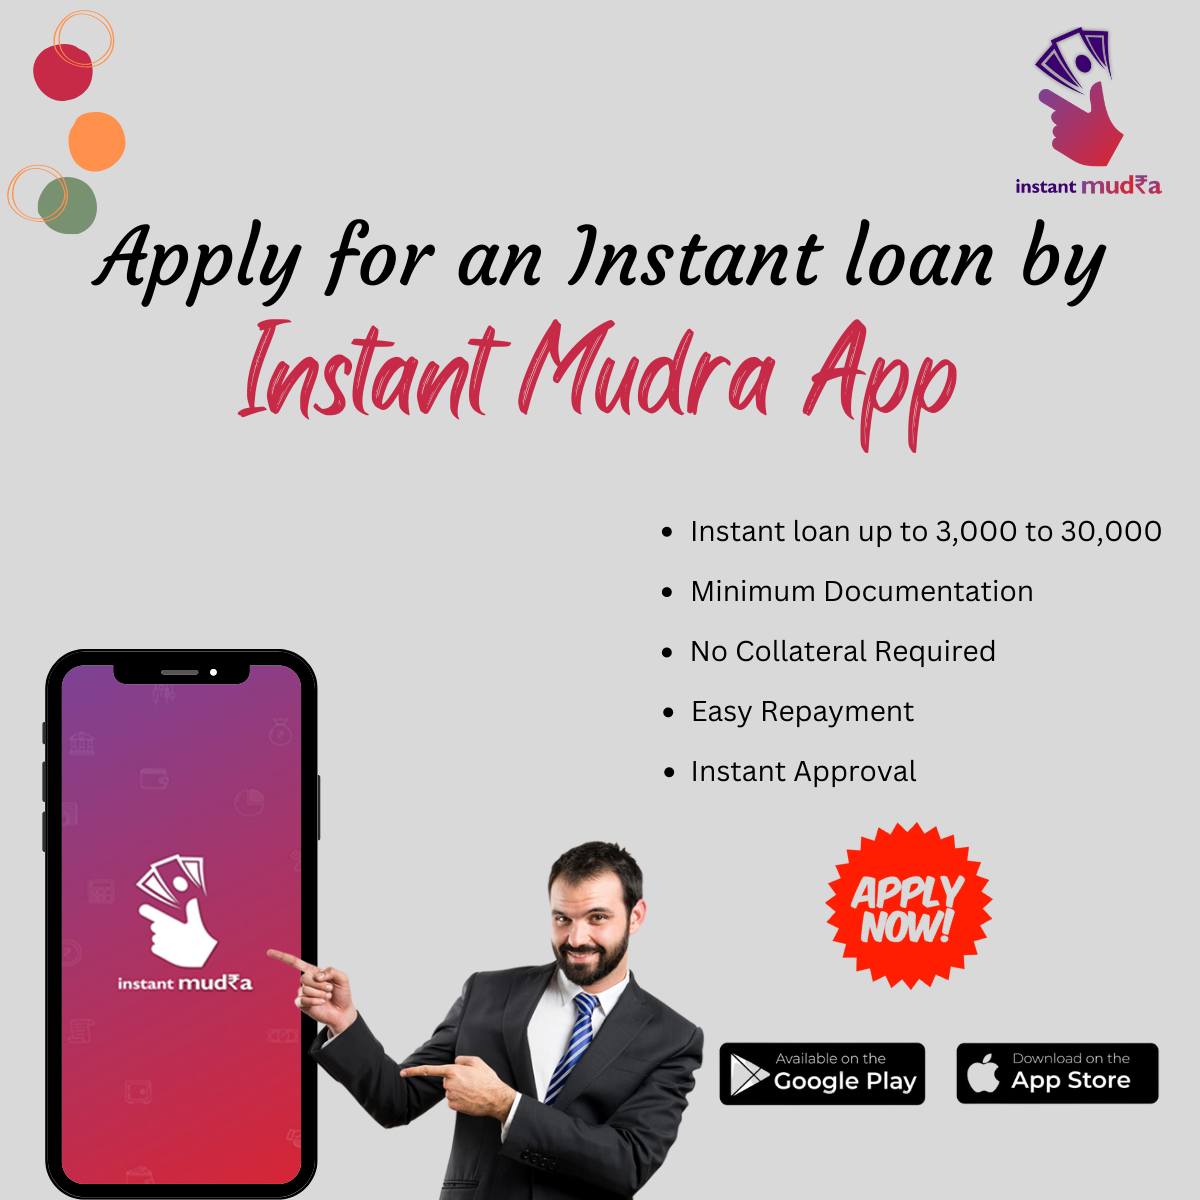 Instant Personal loan App in India